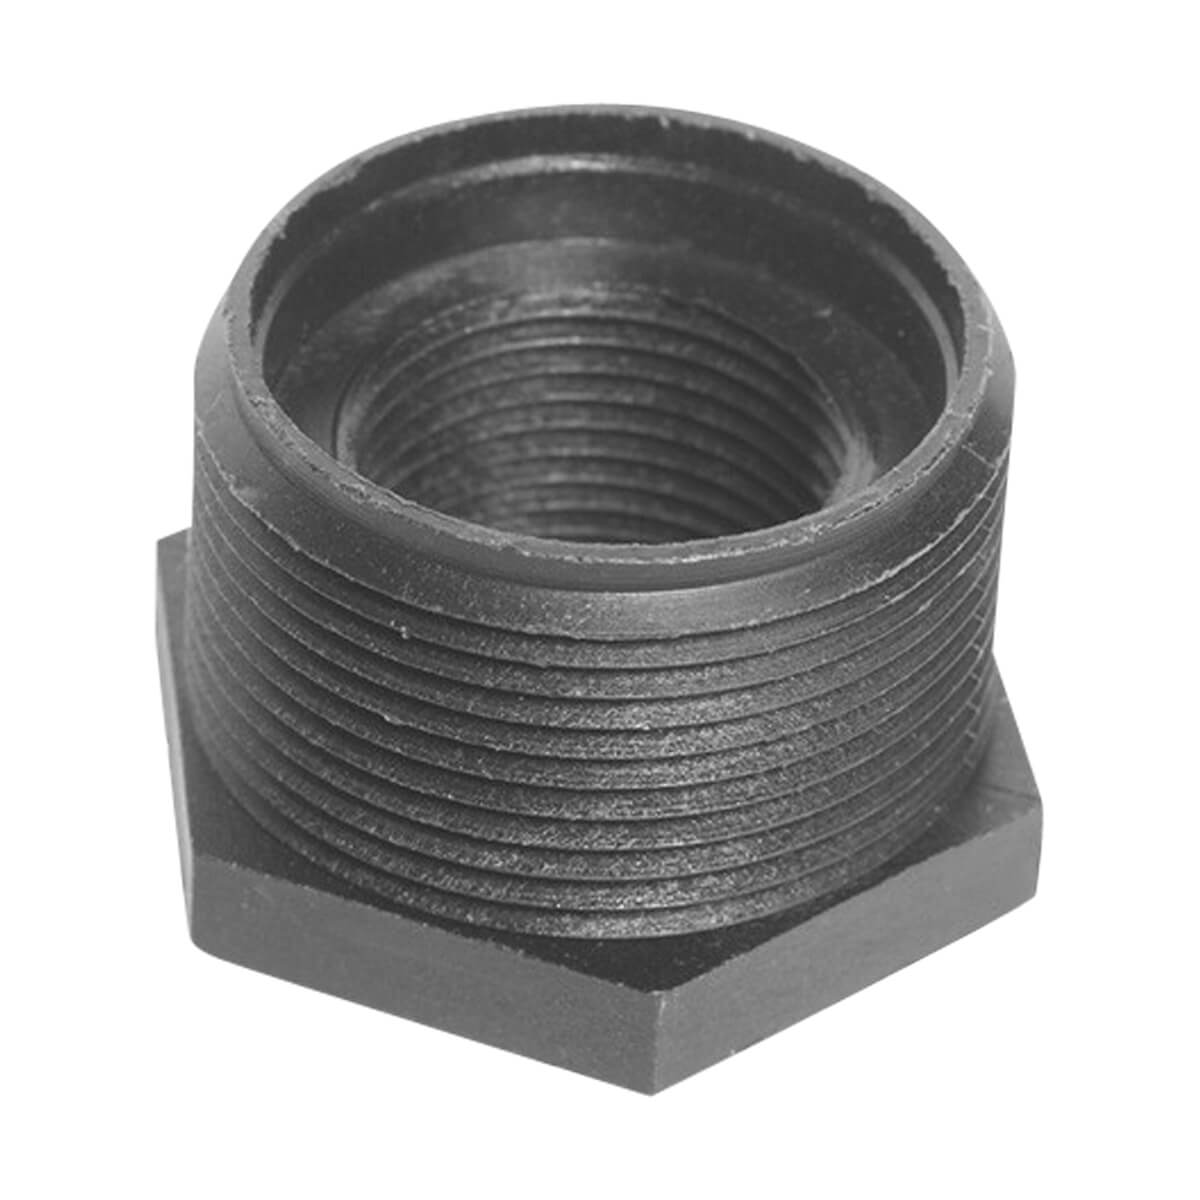 Reducer Bushings MPT x FPT - 1-in x 3/4-in